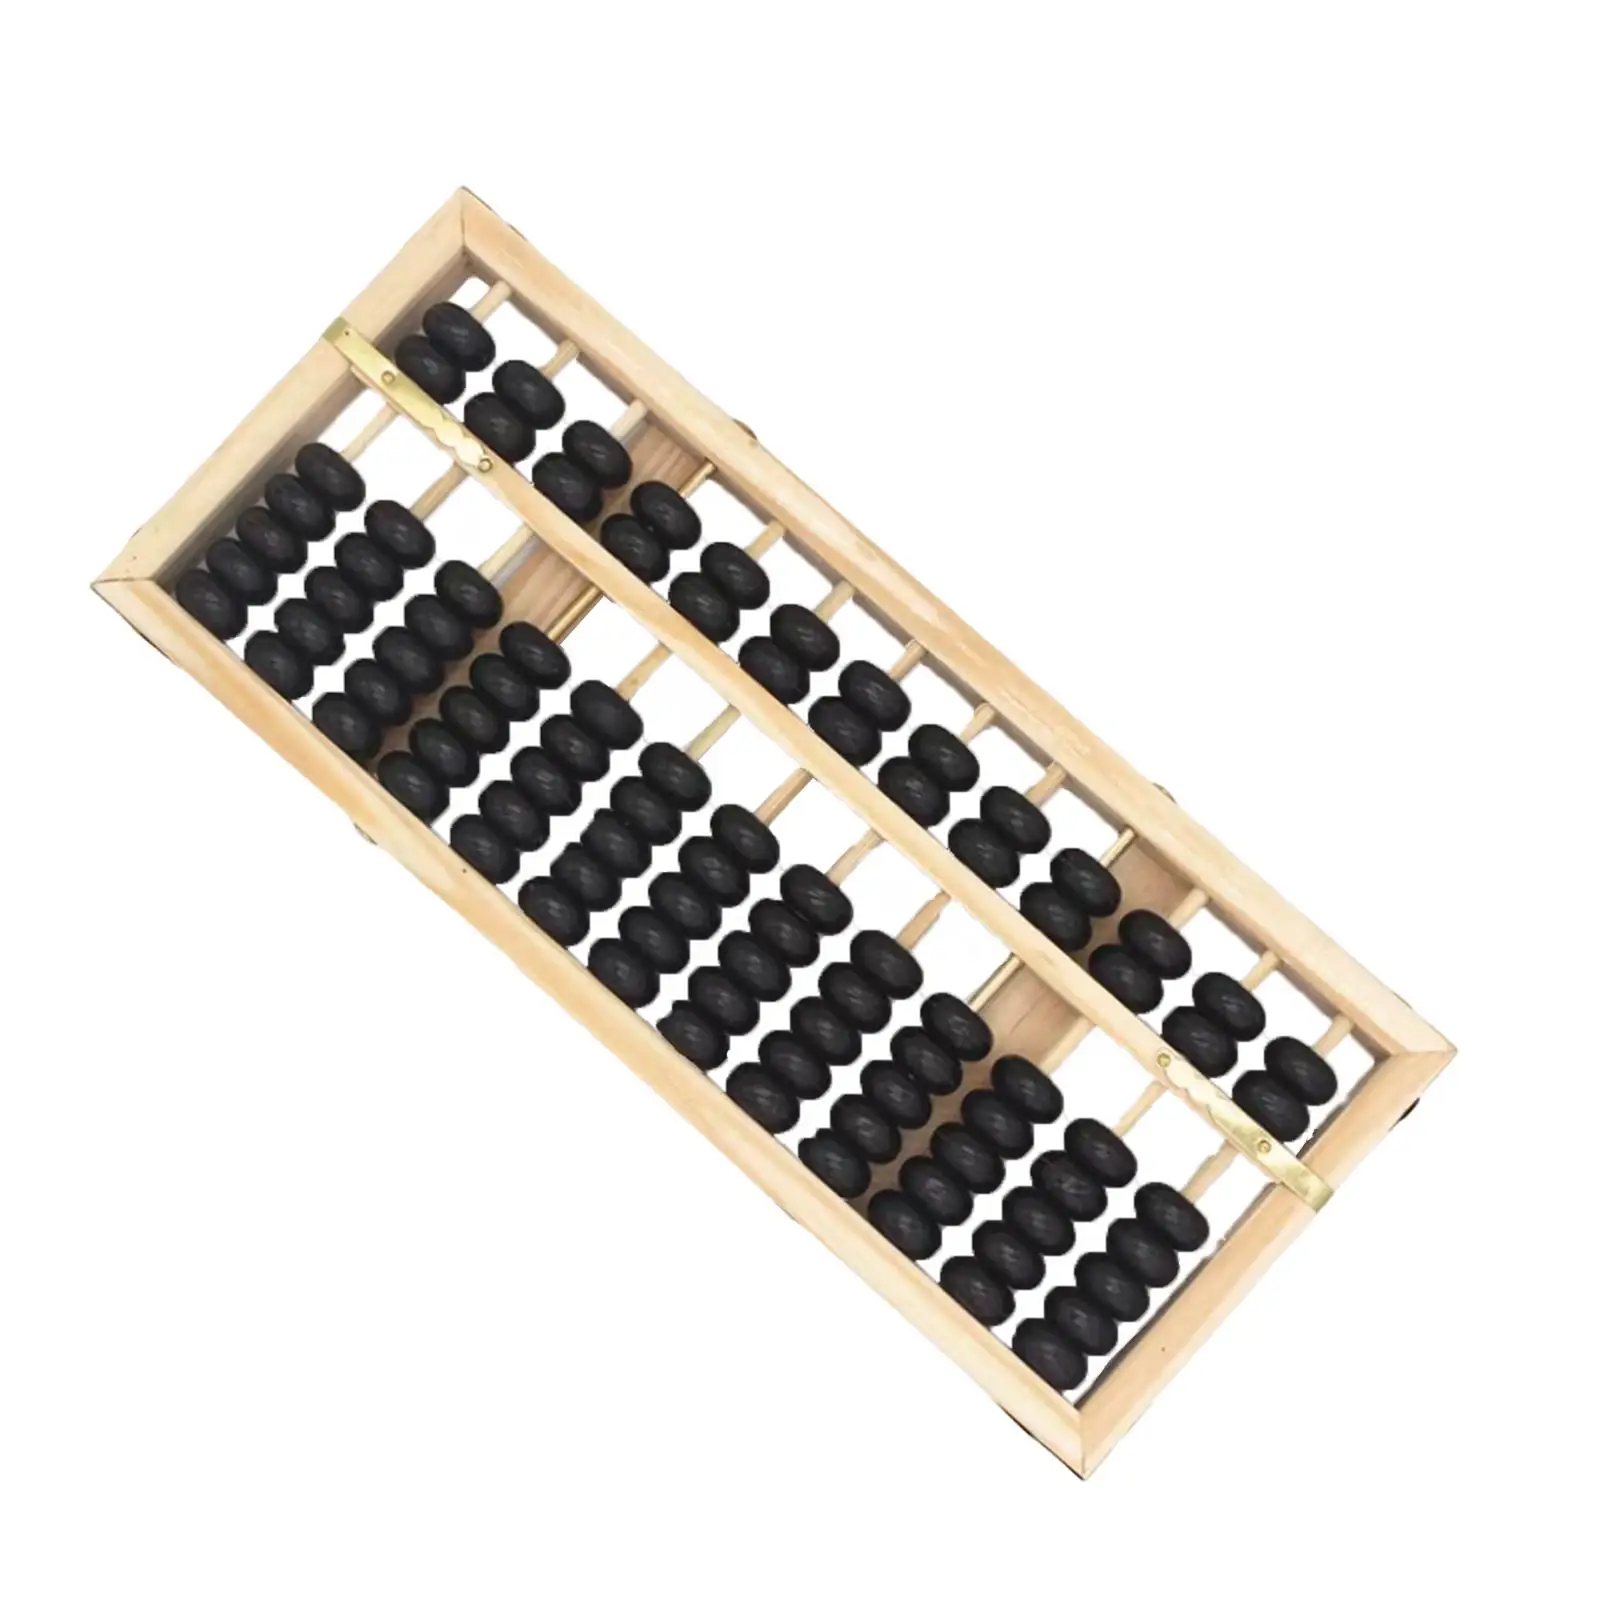 13 Rods Vintage Style Wooden Abacus Educational Tools Math Toys Chinese Calculator Soroban Wood Bead Arithmetic for Adults, Kids